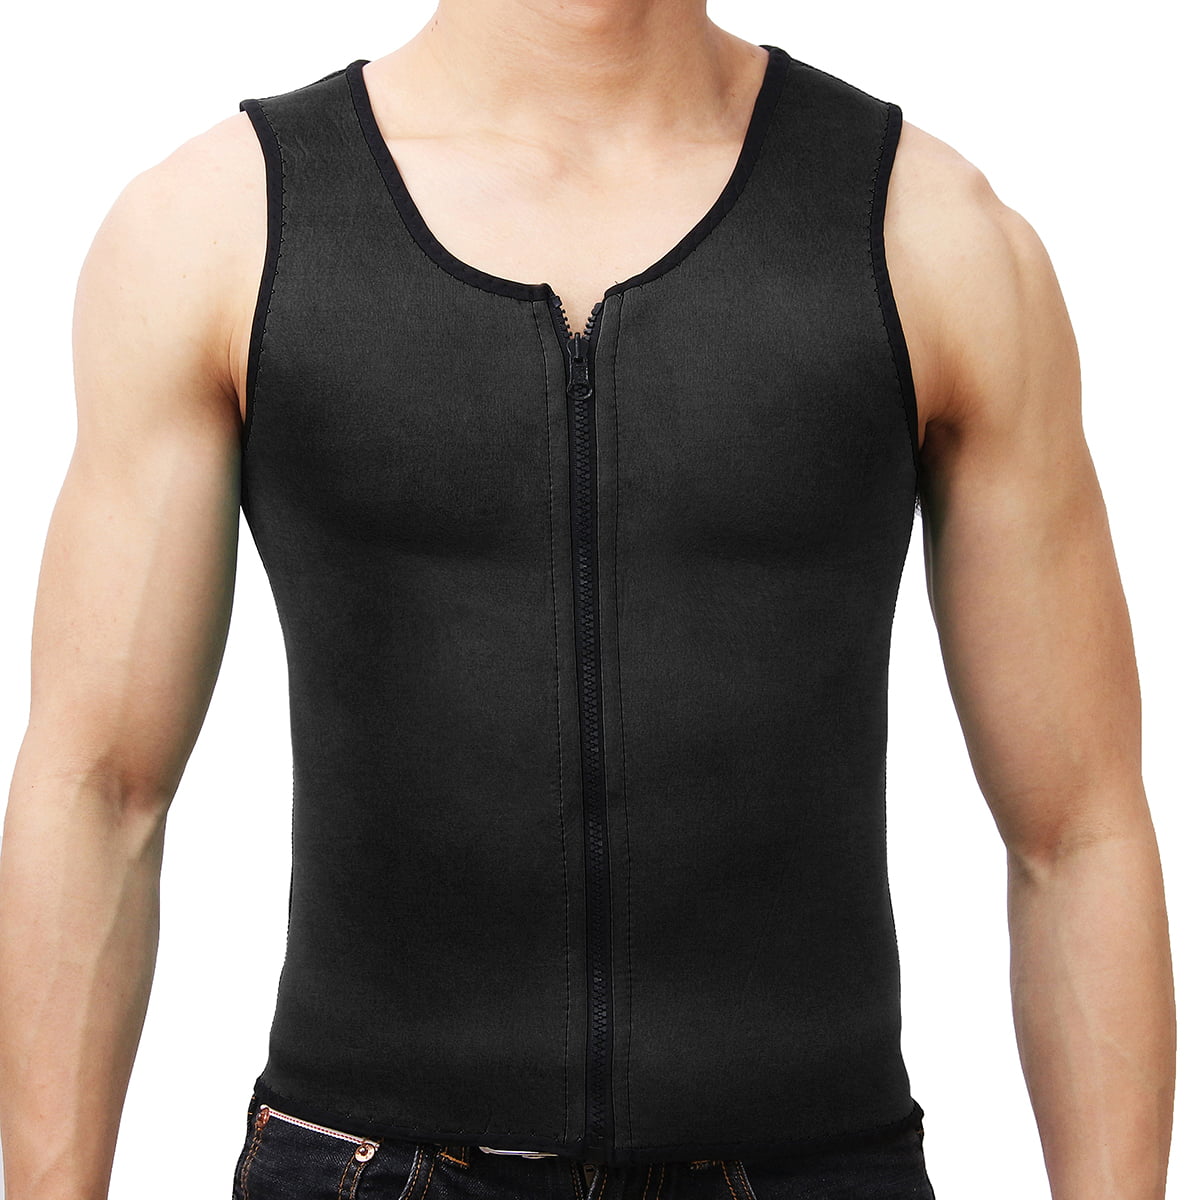 Mens Slimming Compression Vest Waist Shaper Shirt Top for Man Boobs Male Breasts 